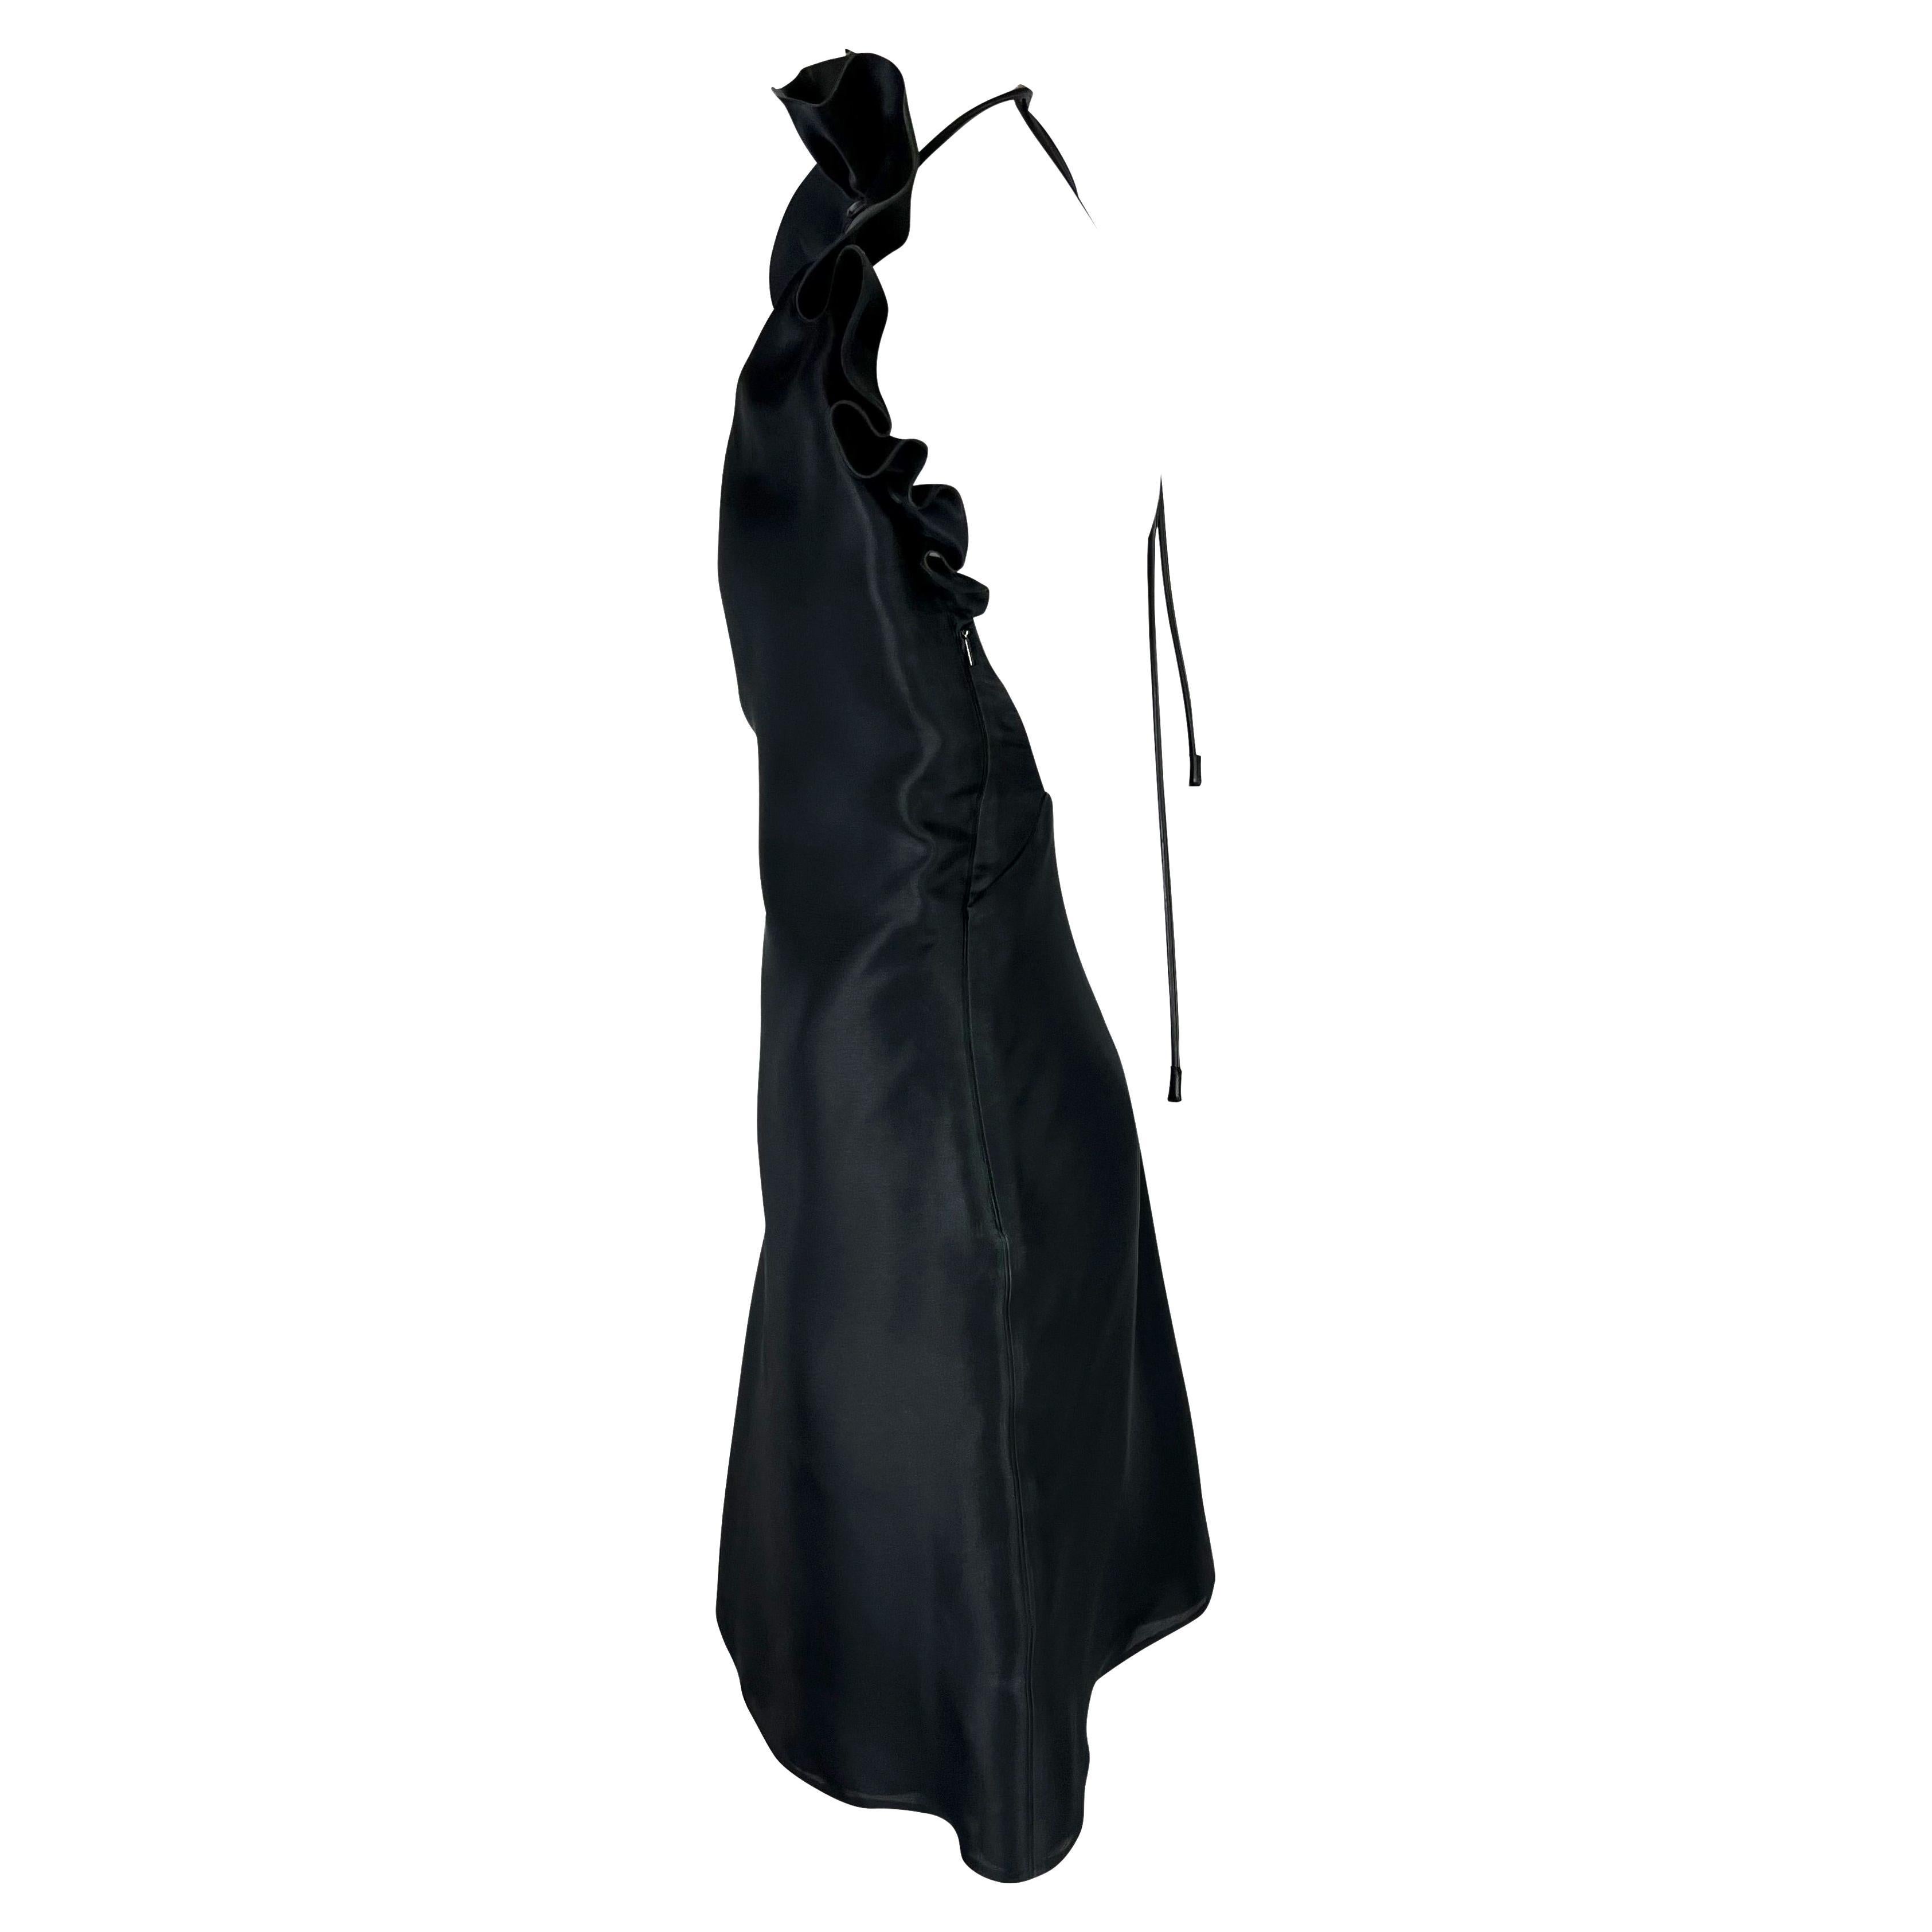 F/W 2000 Gucci by Tom Ford Black Silk Taffeta Backless Ruffle Dress In Good Condition For Sale In West Hollywood, CA